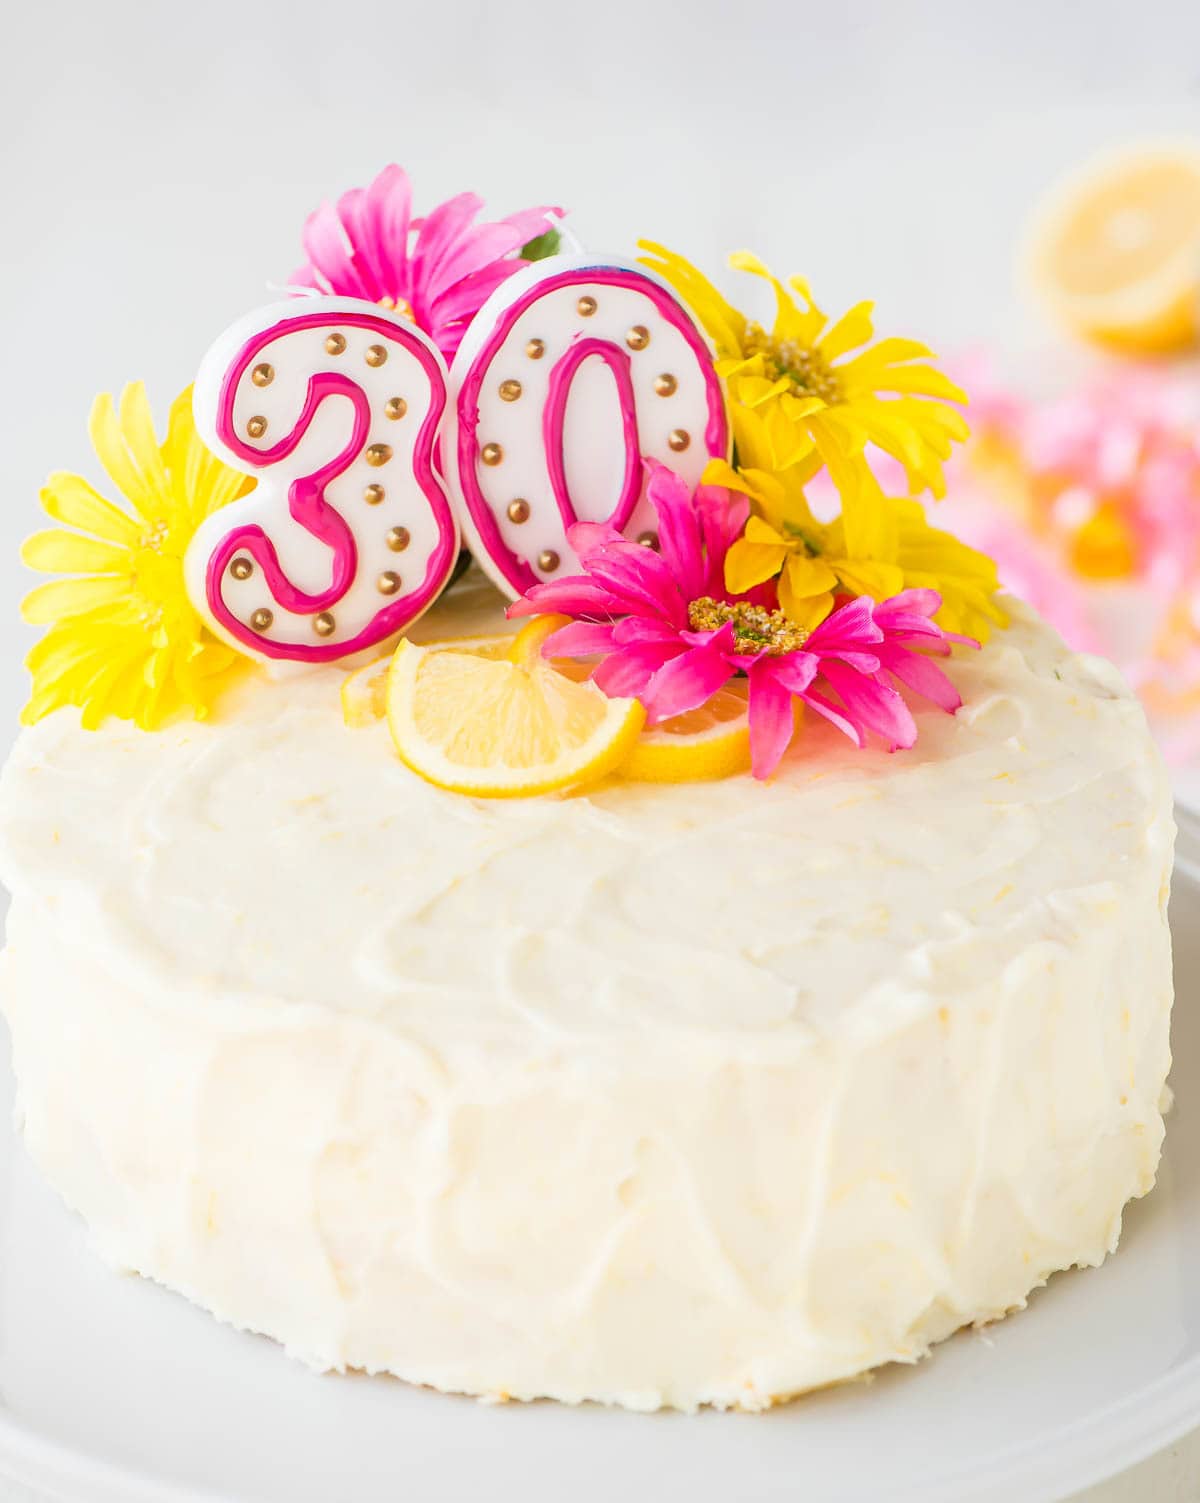 A simple lemon cake recipe decorated with cream cheese frosting, flowers, and candles